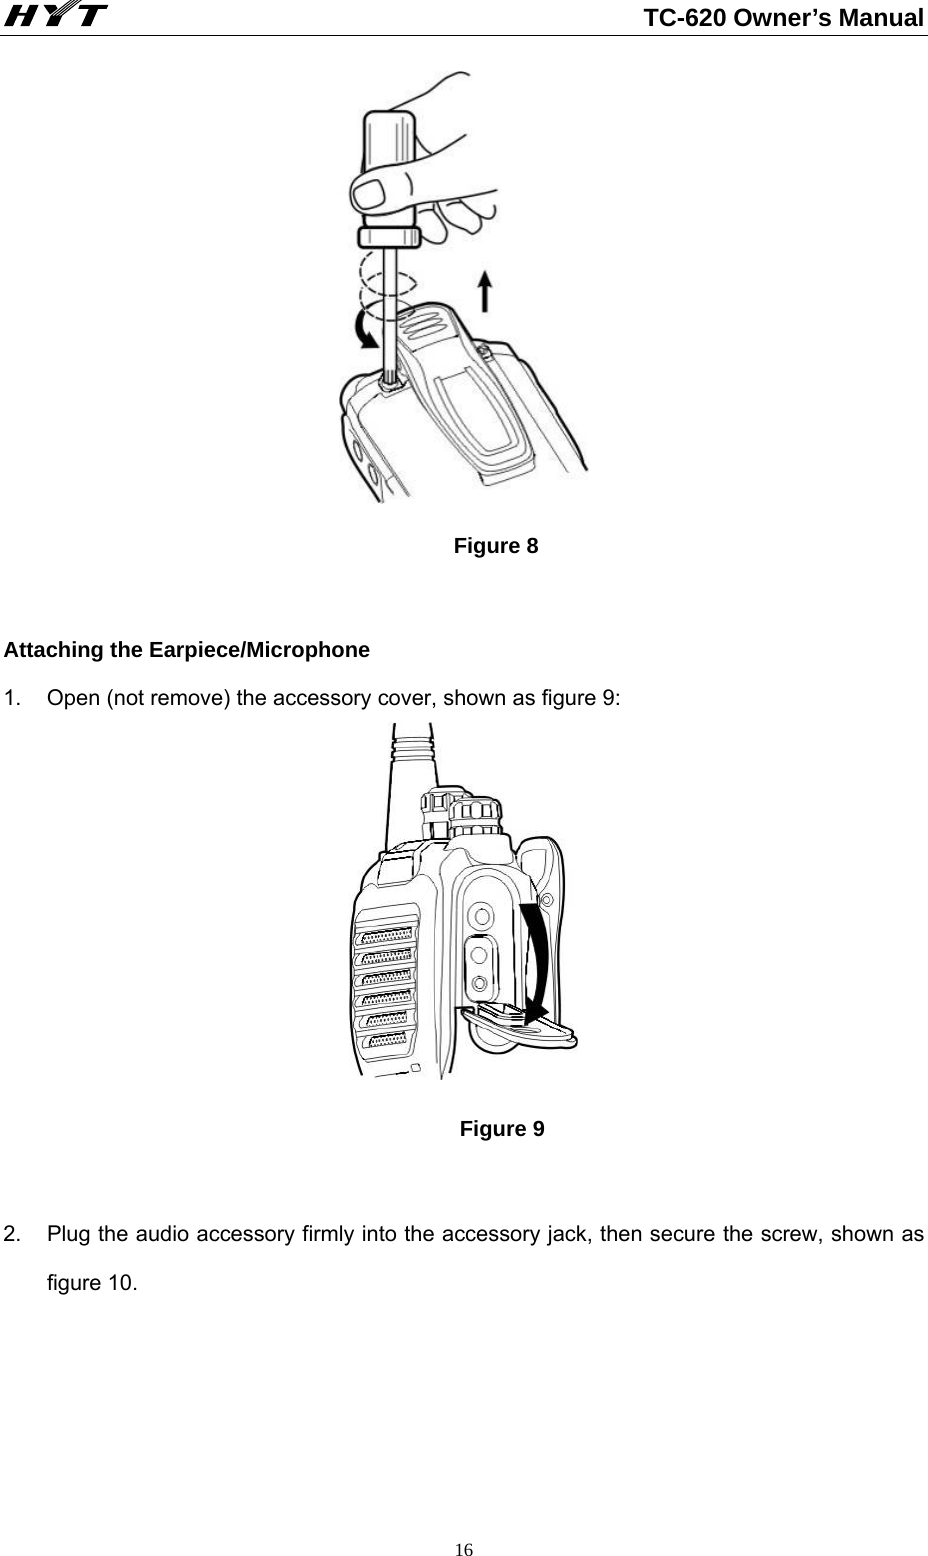                                                          TC-620 Owner’s Manual  16 Figure 8  Attaching the Earpiece/Microphone     1.  Open (not remove) the accessory cover, shown as figure 9:     Figure 9   2.  Plug the audio accessory firmly into the accessory jack, then secure the screw, shown as figure 10.   